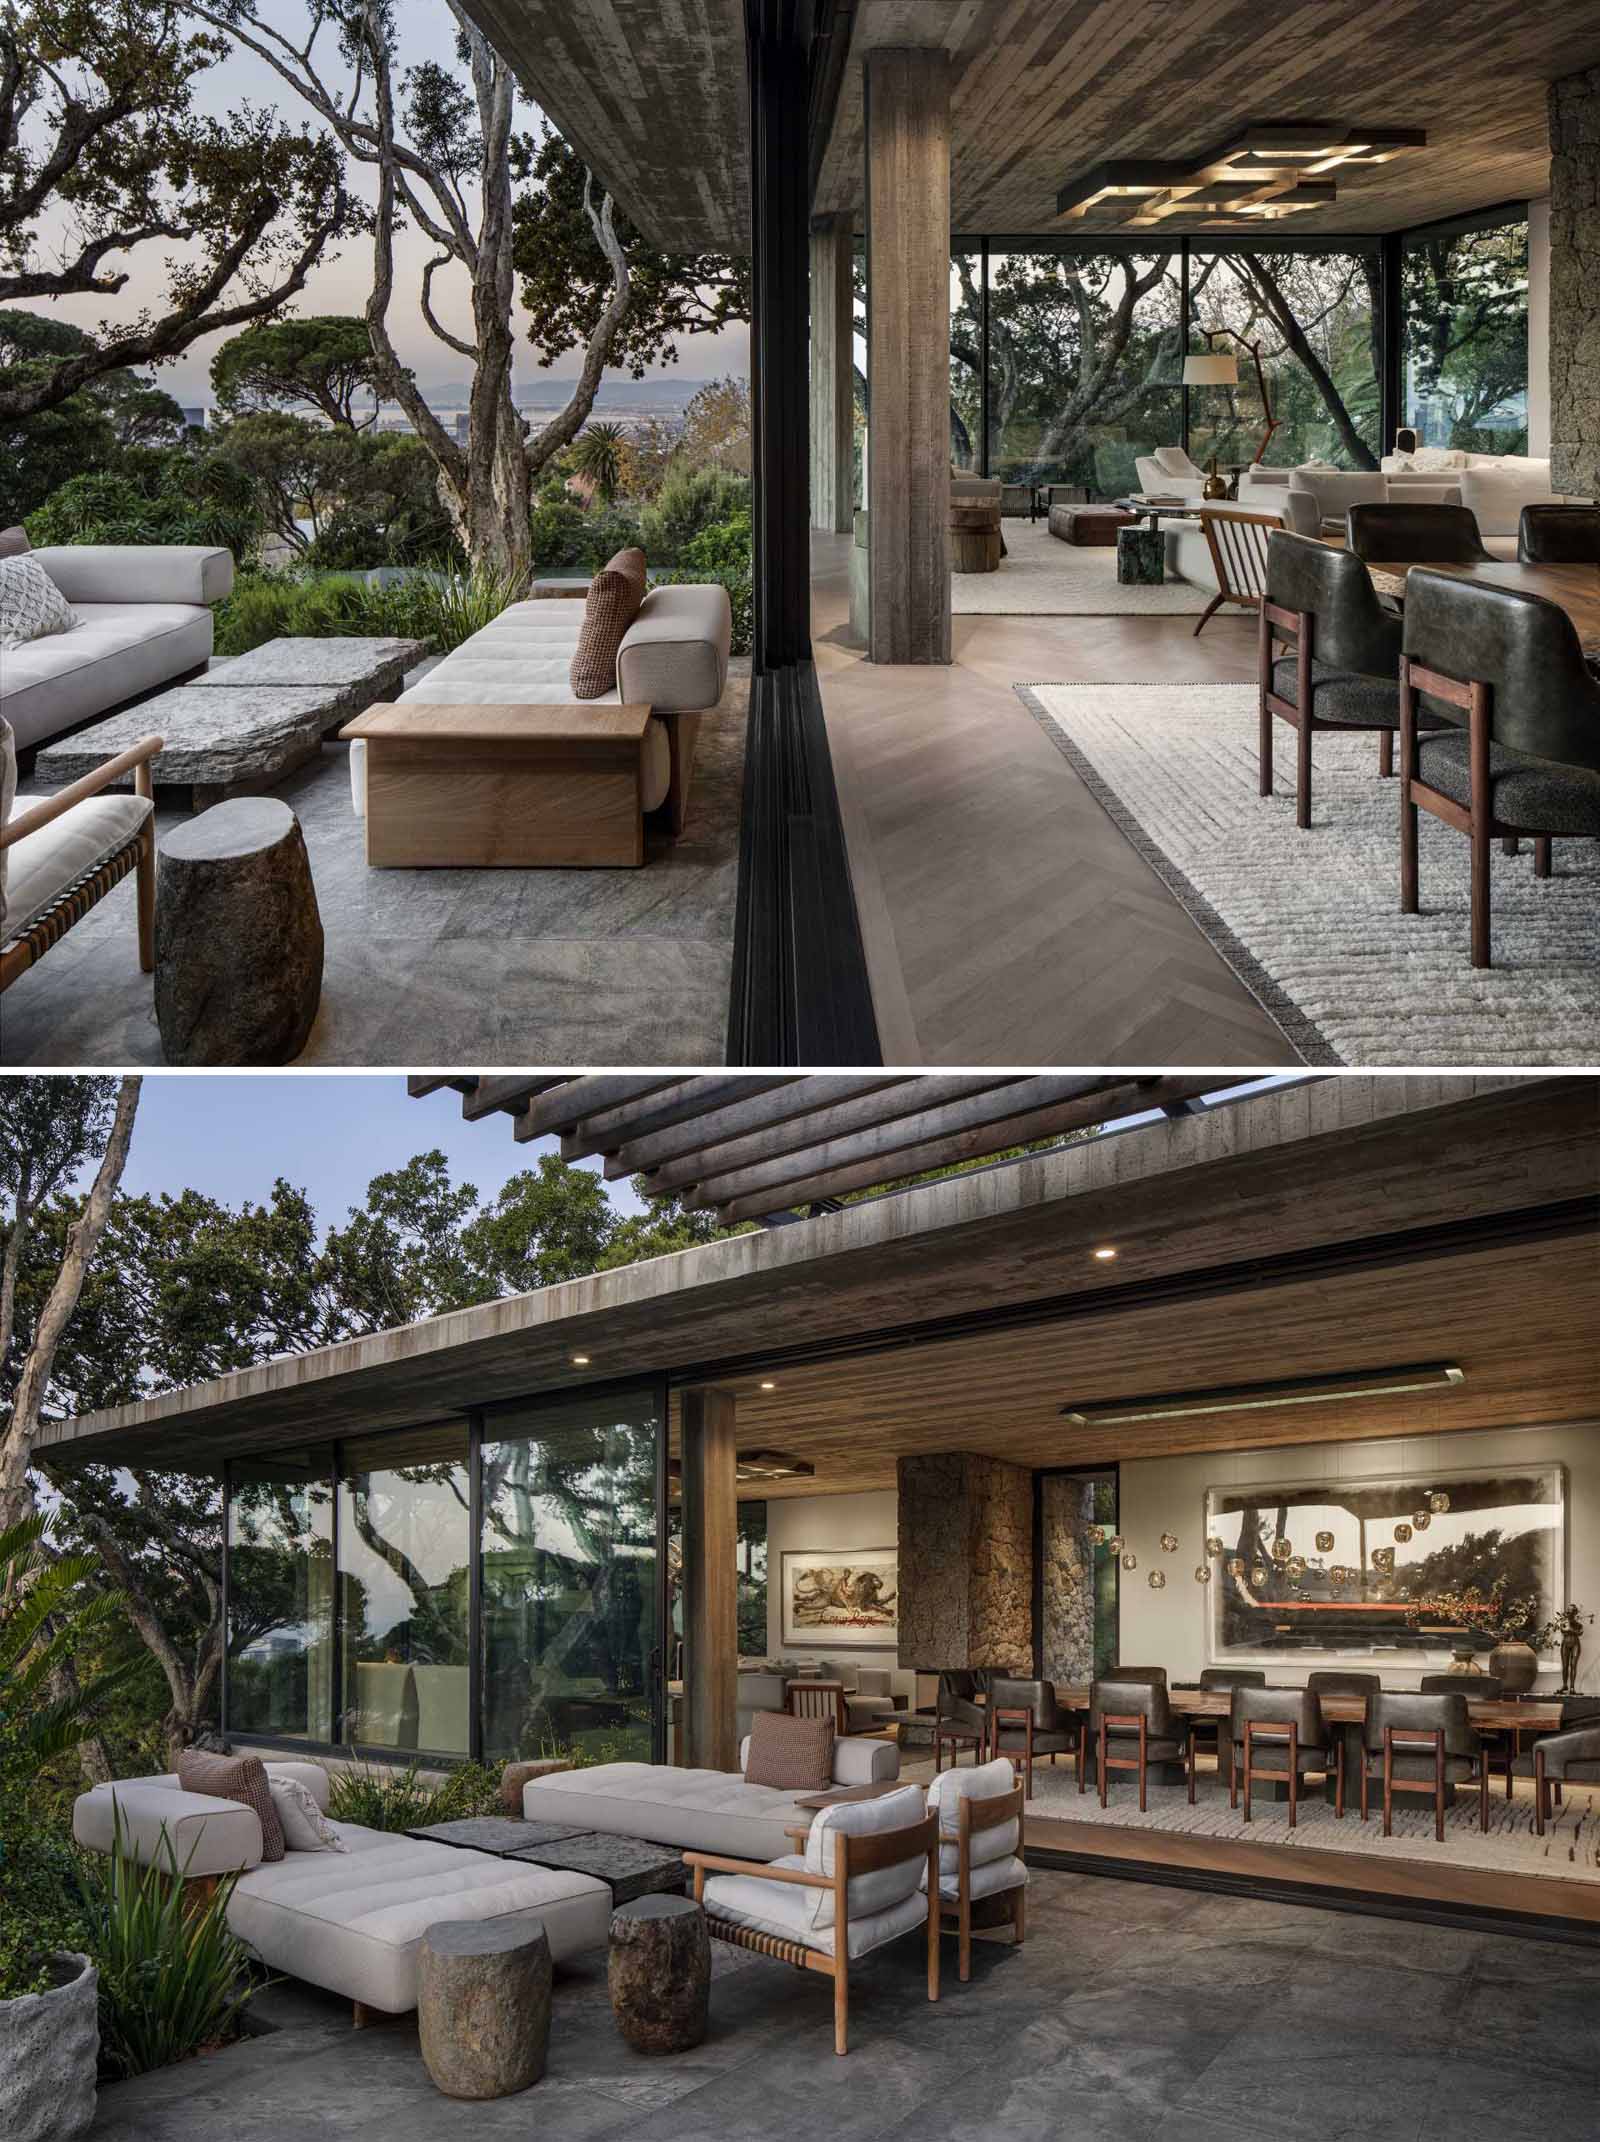 A sliding glass door opens the dining area to a terrace that's been furnished as an outdoor living room.